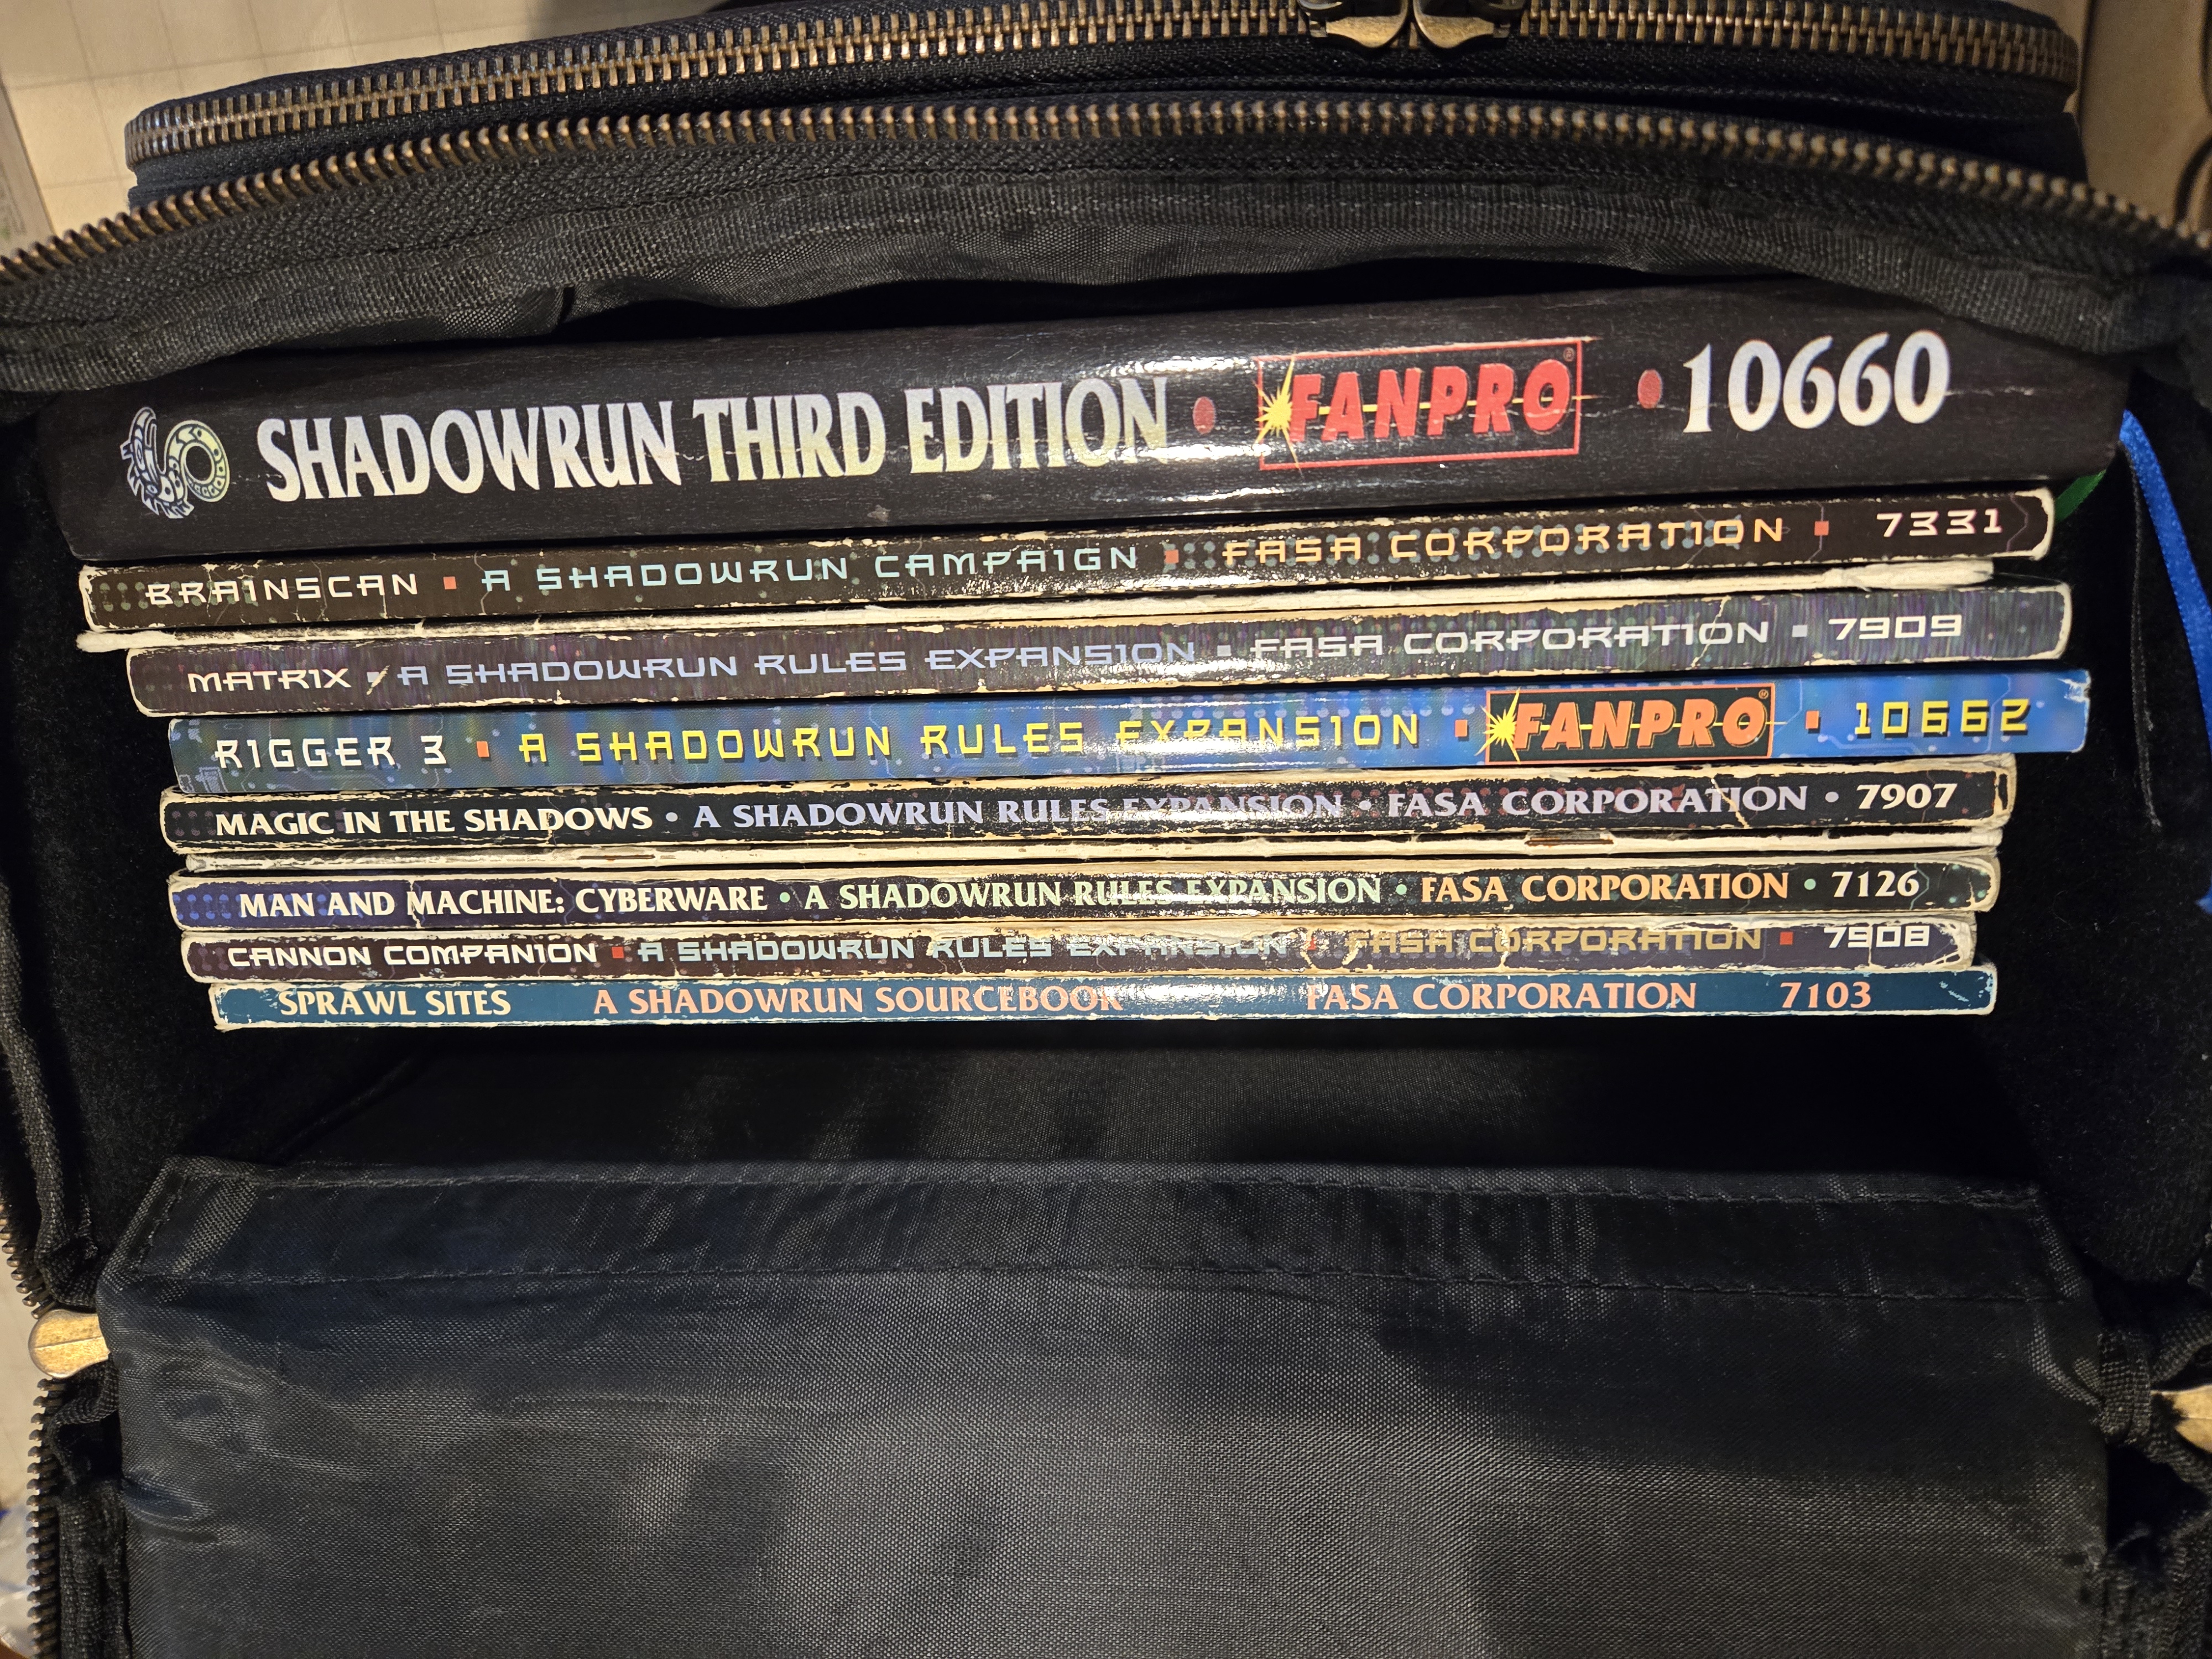 Several Shadowrun books in the case itself